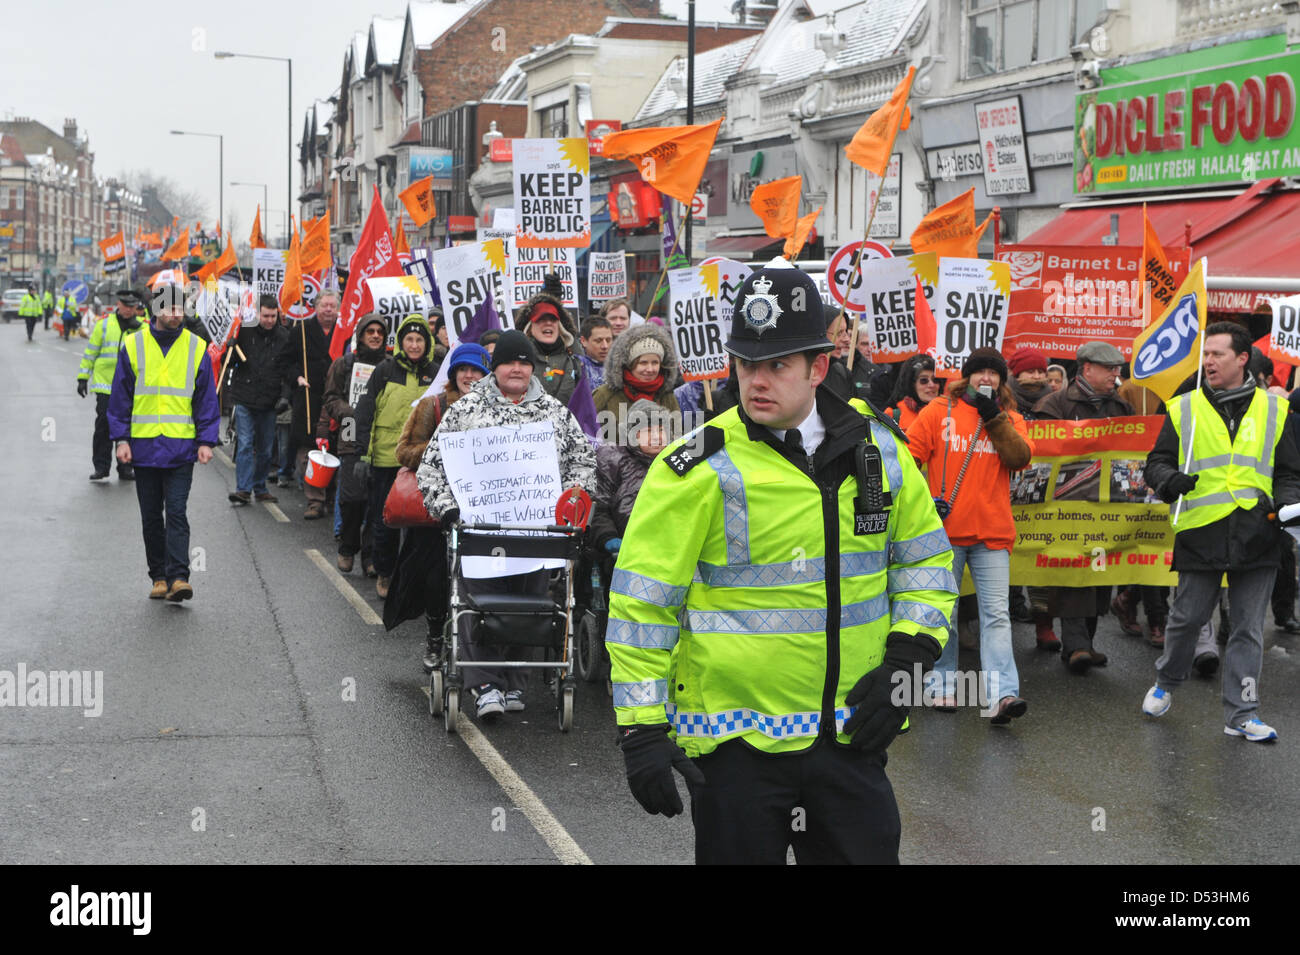 Barnet, London, UK. 23rd March 2013. Protesters with banners and placards on the march against the privatisation of public services in Barnet. Protest march in Barnet against the privatisation of public services by Barnet Council. Credit:  Matthew Chattle / Alamy Live News Stock Photo